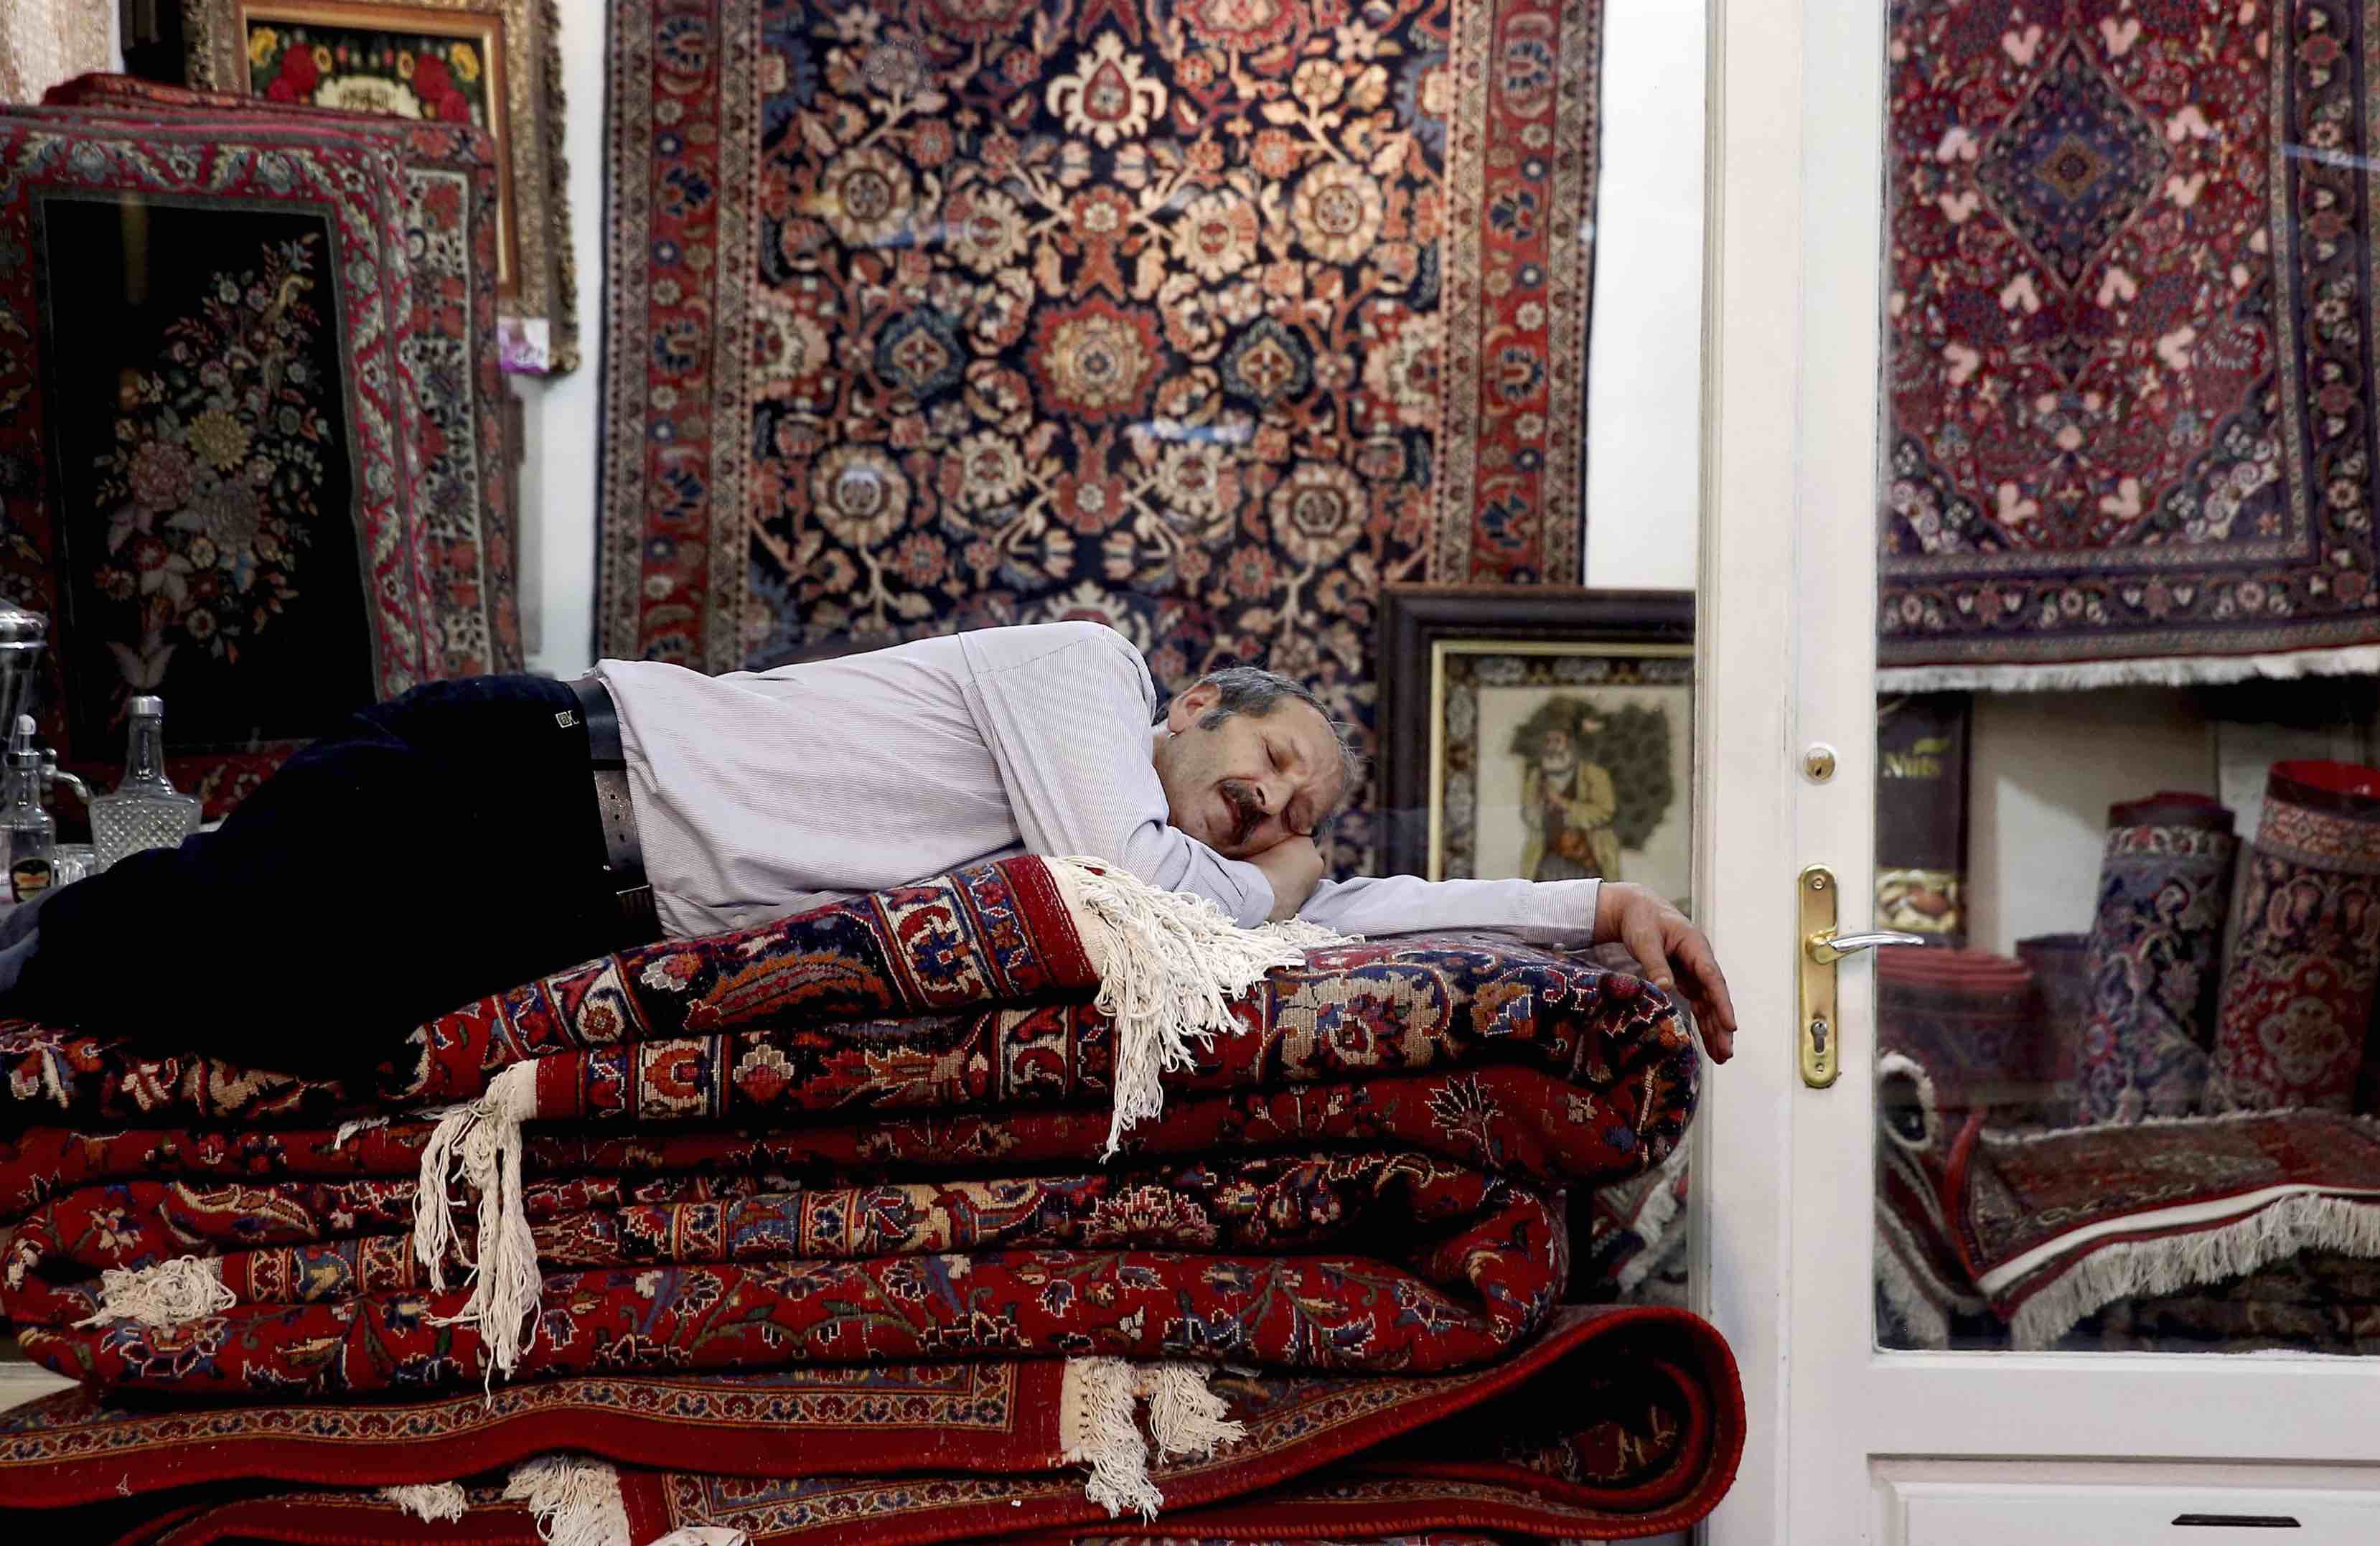 An Iranian carpet seller takes a nap in the old Bazaar in Tehran